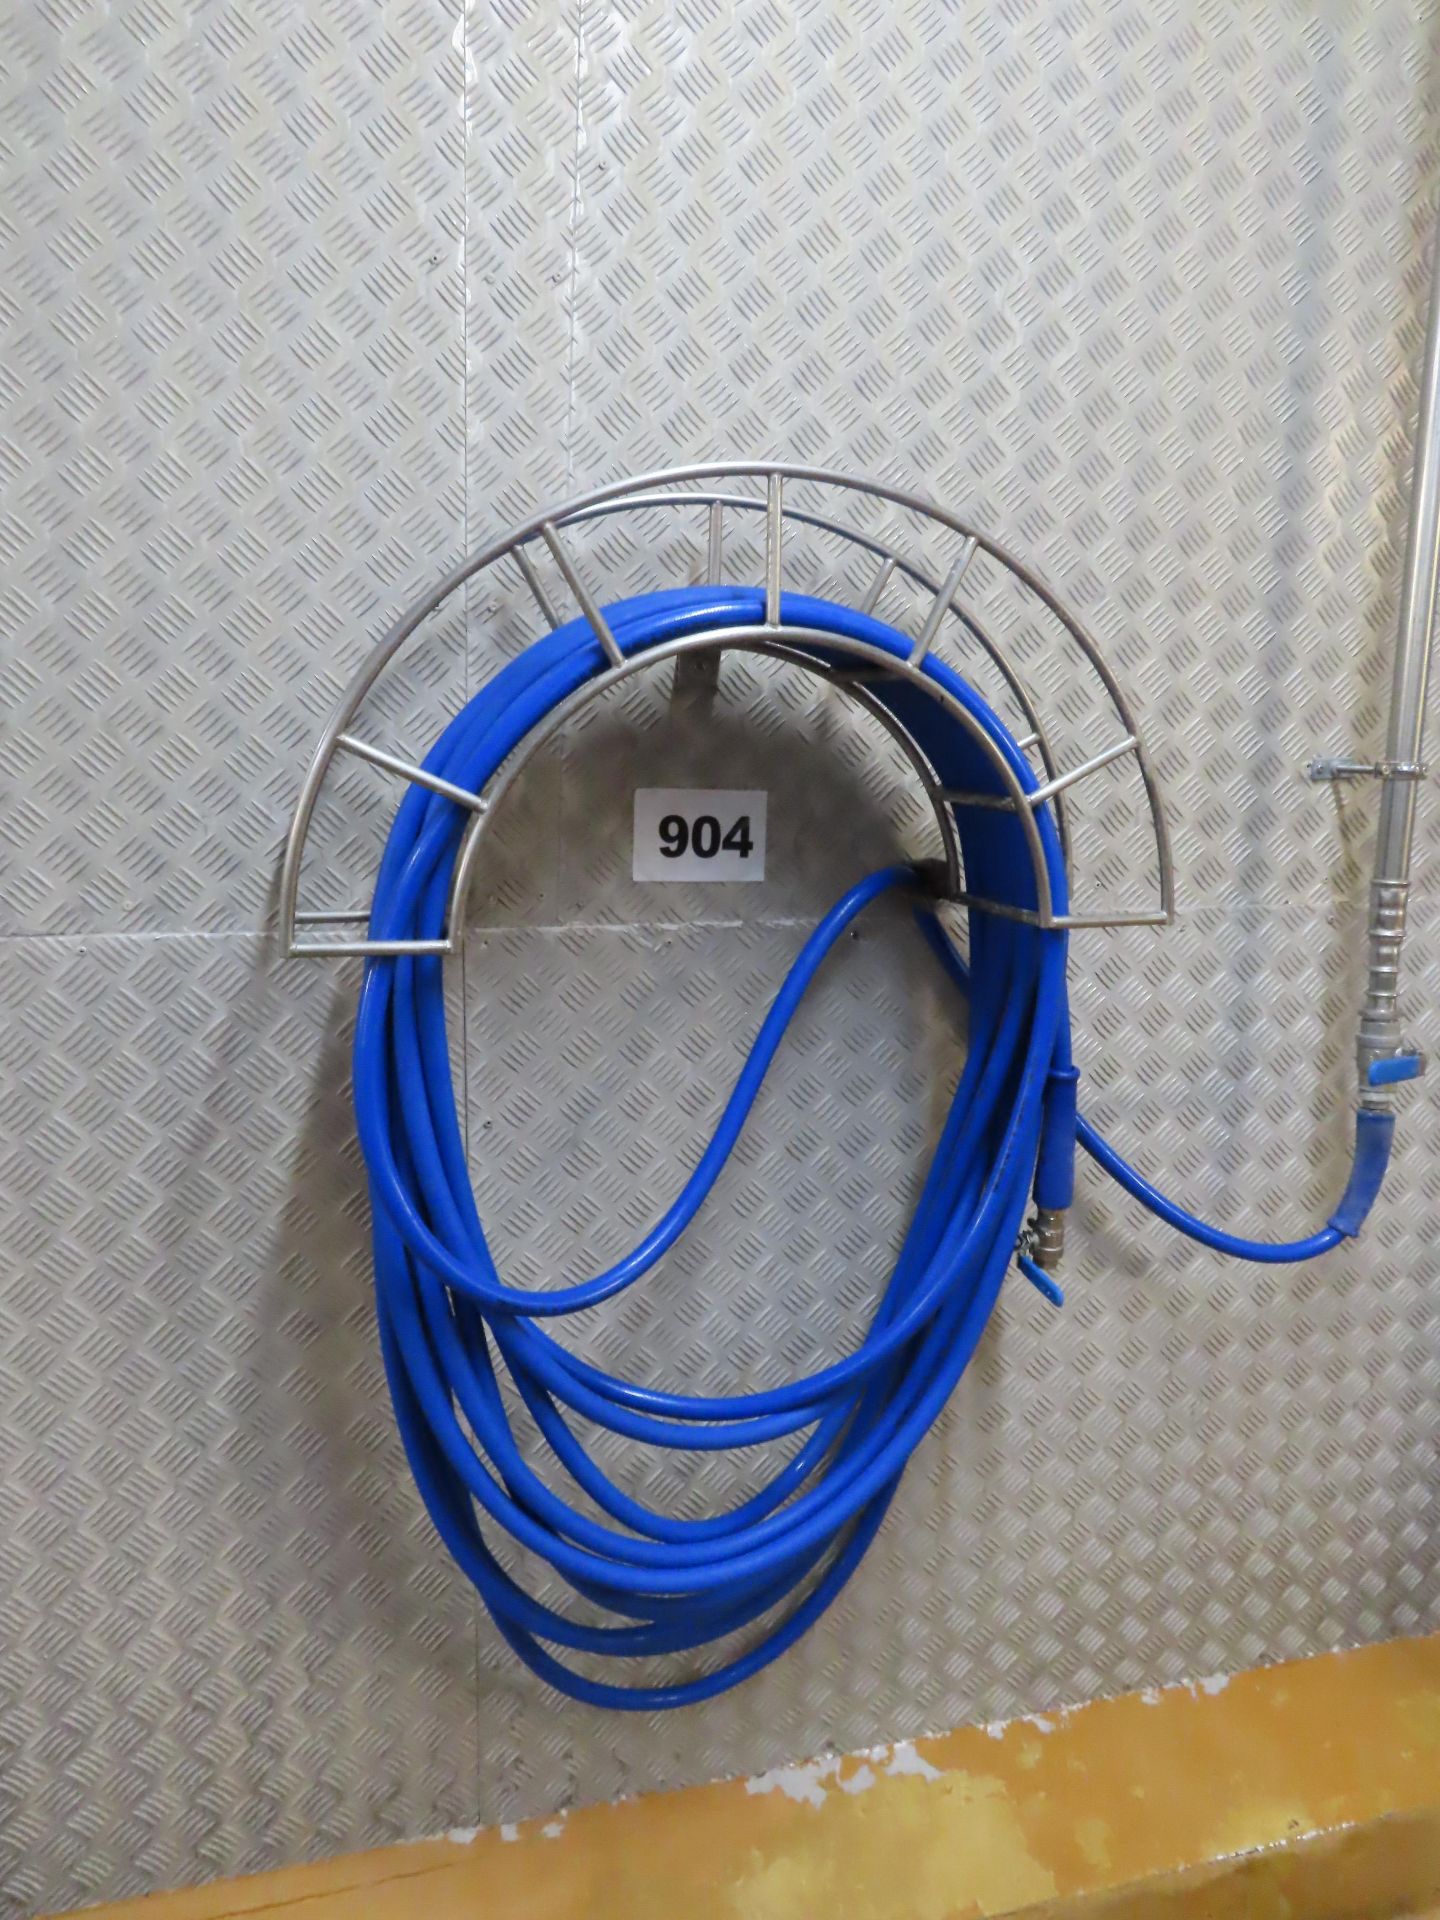 WALL MOUNTED HOSE RELL AND HOLDER.